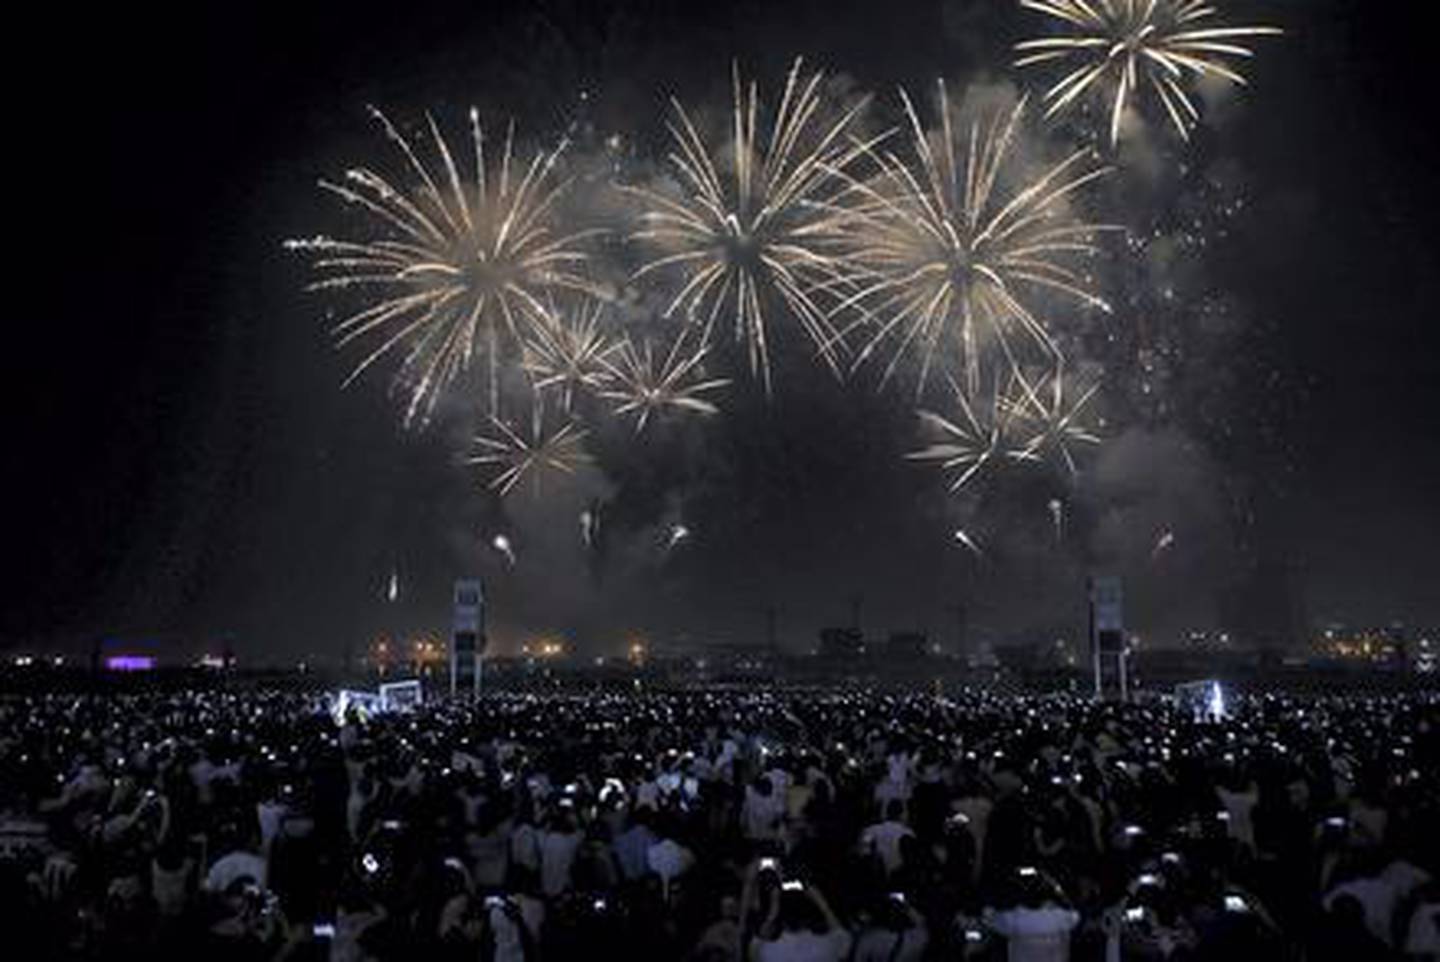 Fireworks display to celebrate Eid Al Adha at the Festival City in Dubai. Satish Kumar for The National